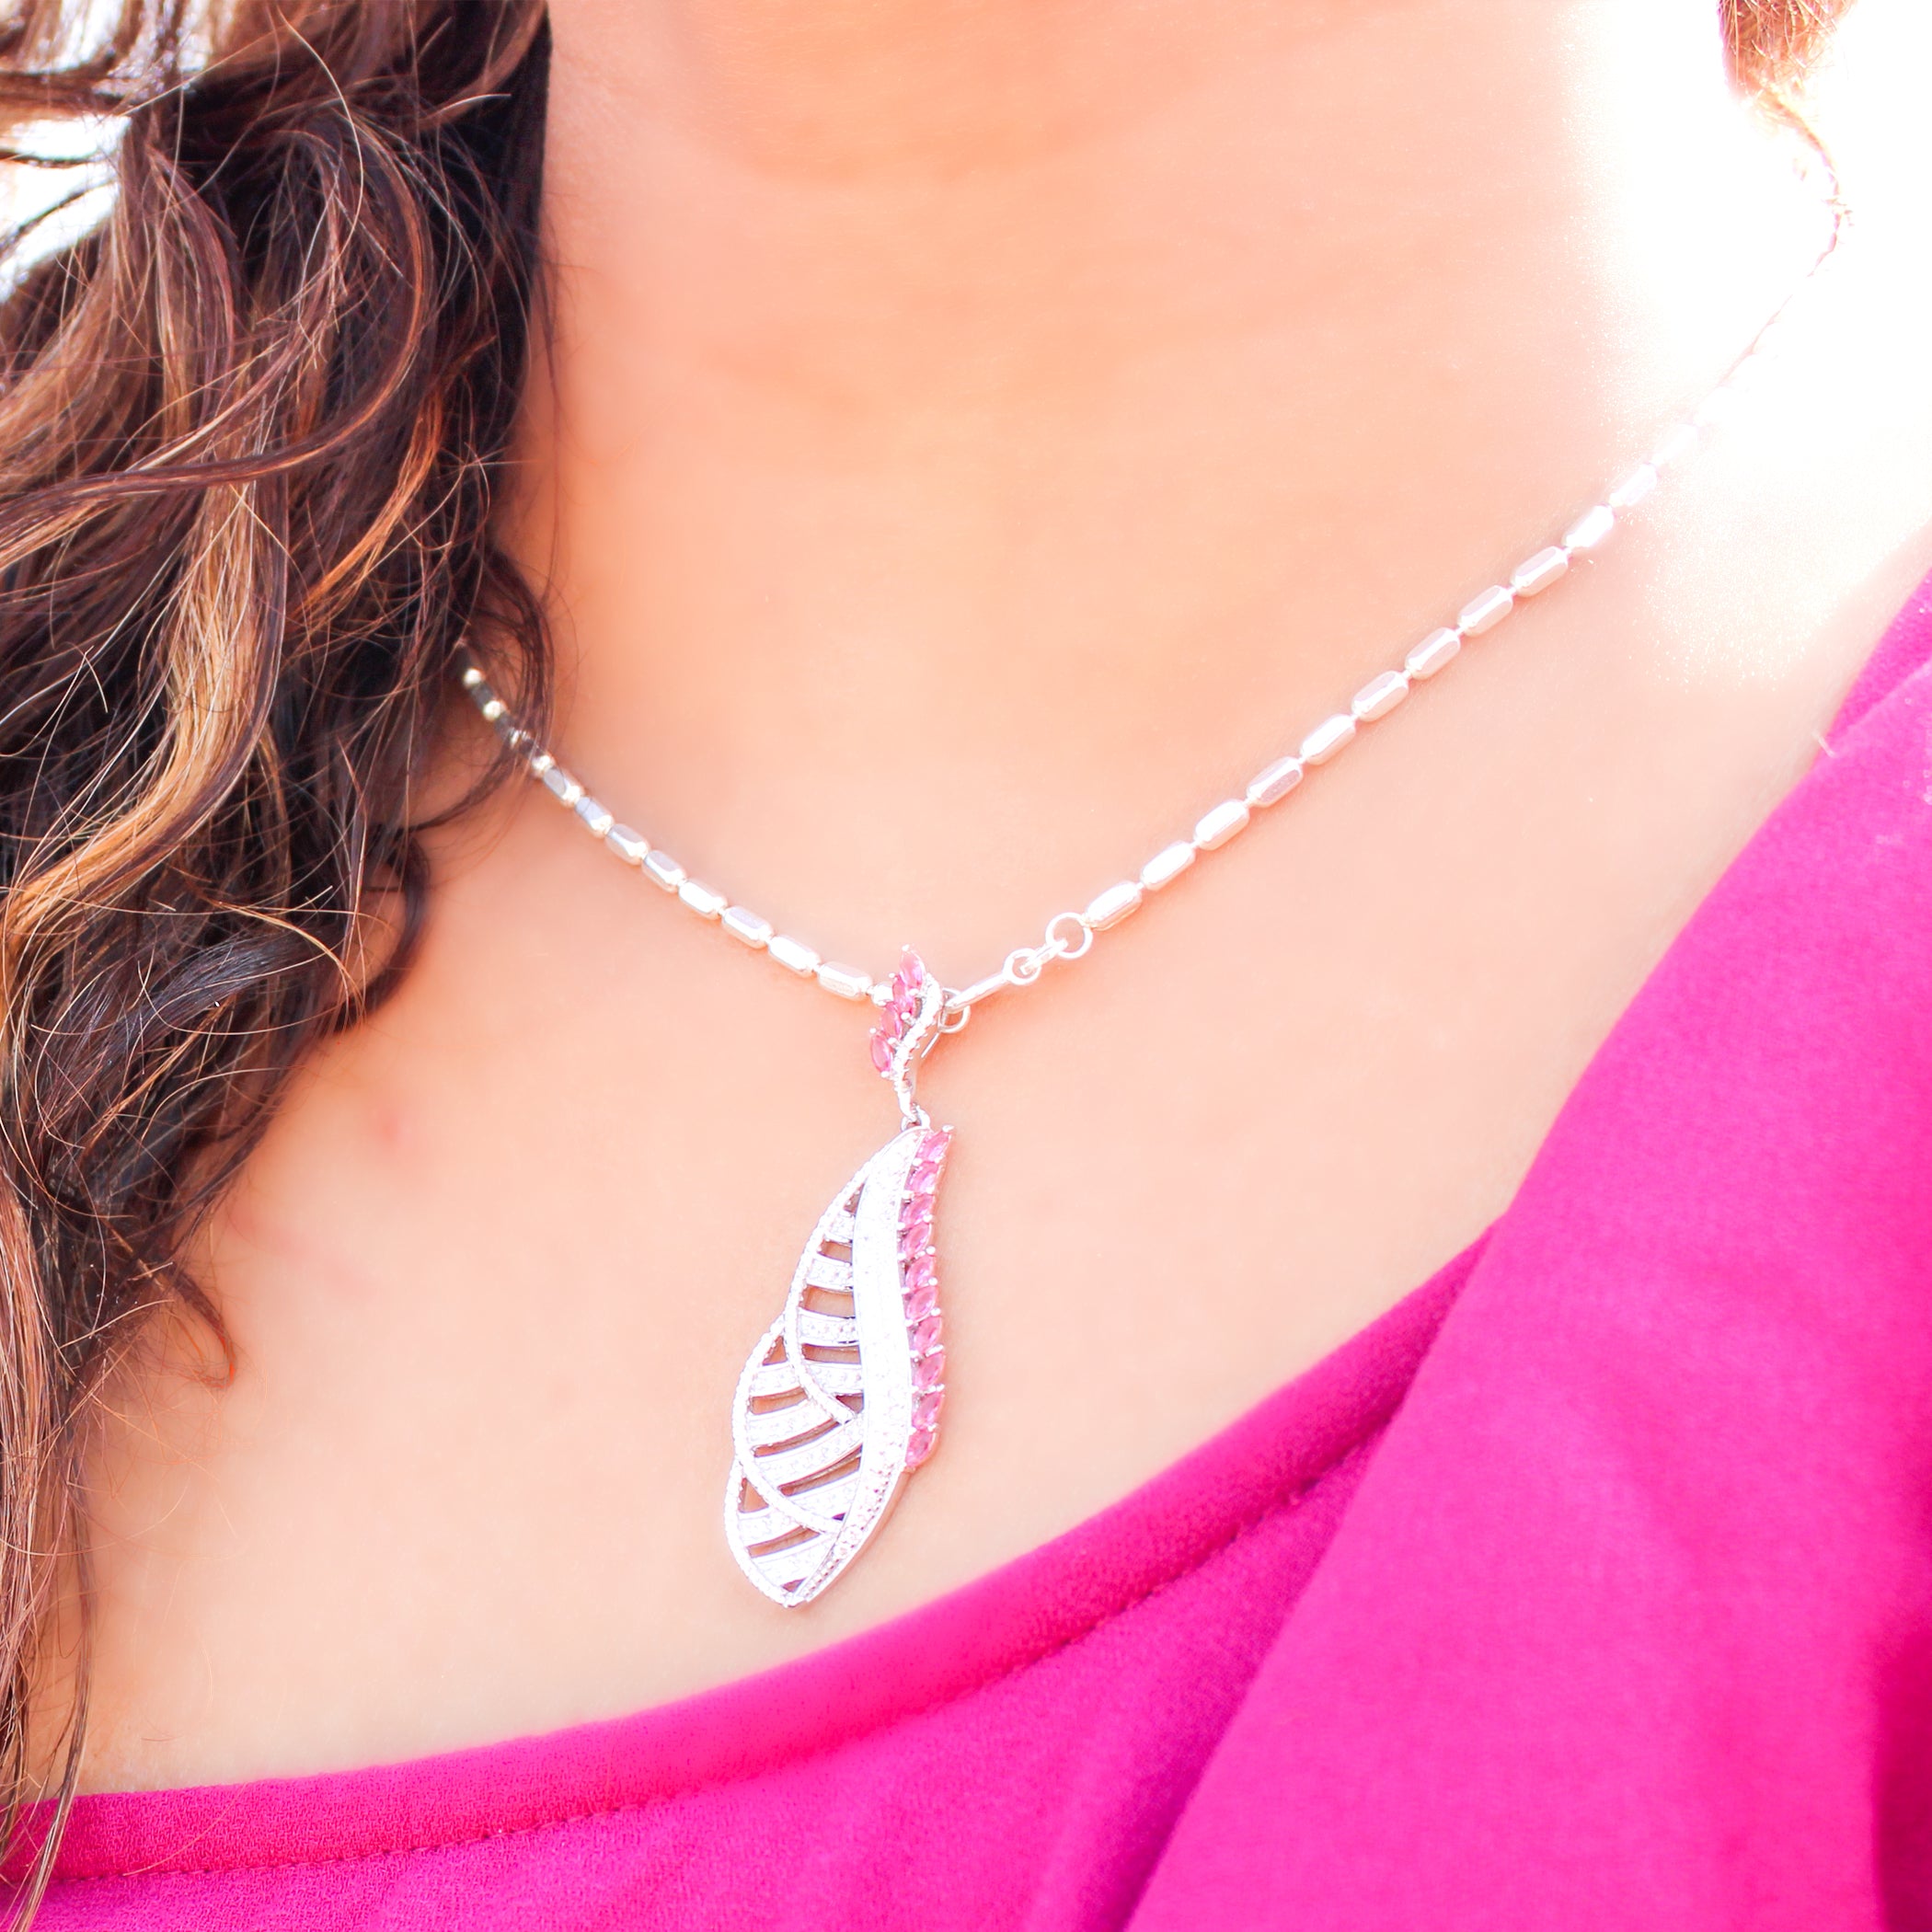 92.5 sterling silver pendant studded with white & pink zirconias in the shape of leaves